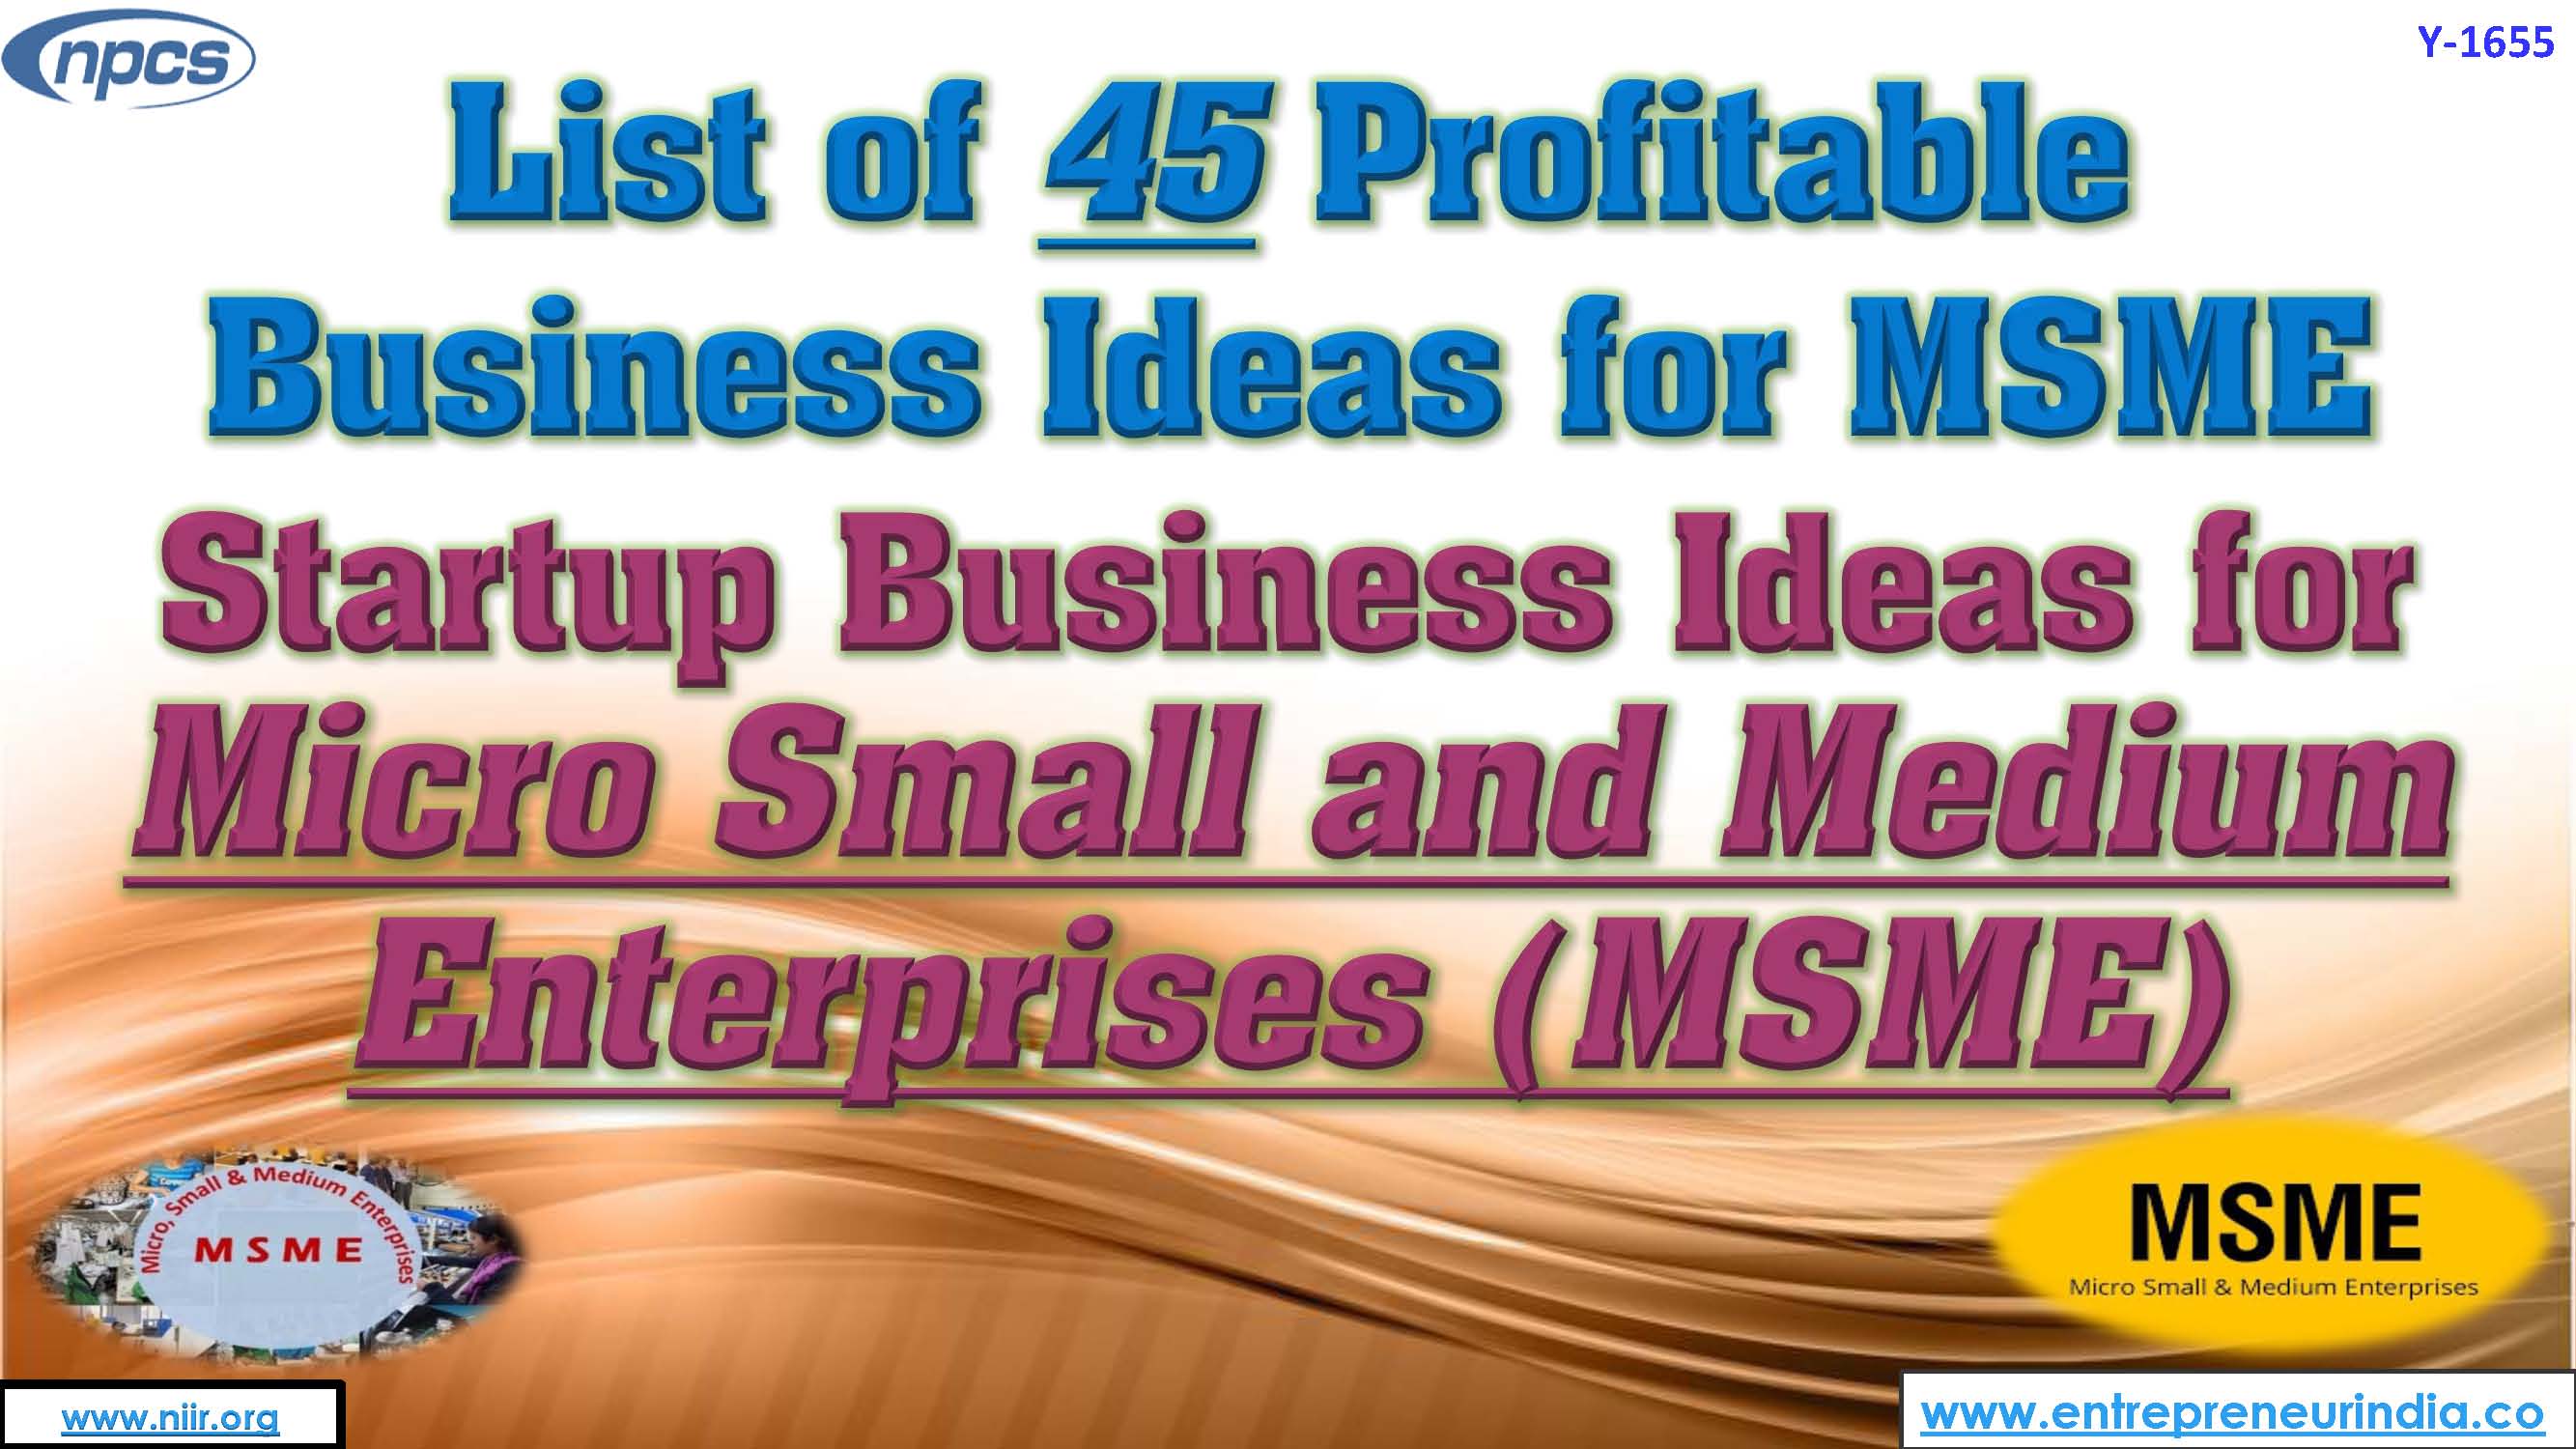 List of 45 Profitable Business Ideas for MSME